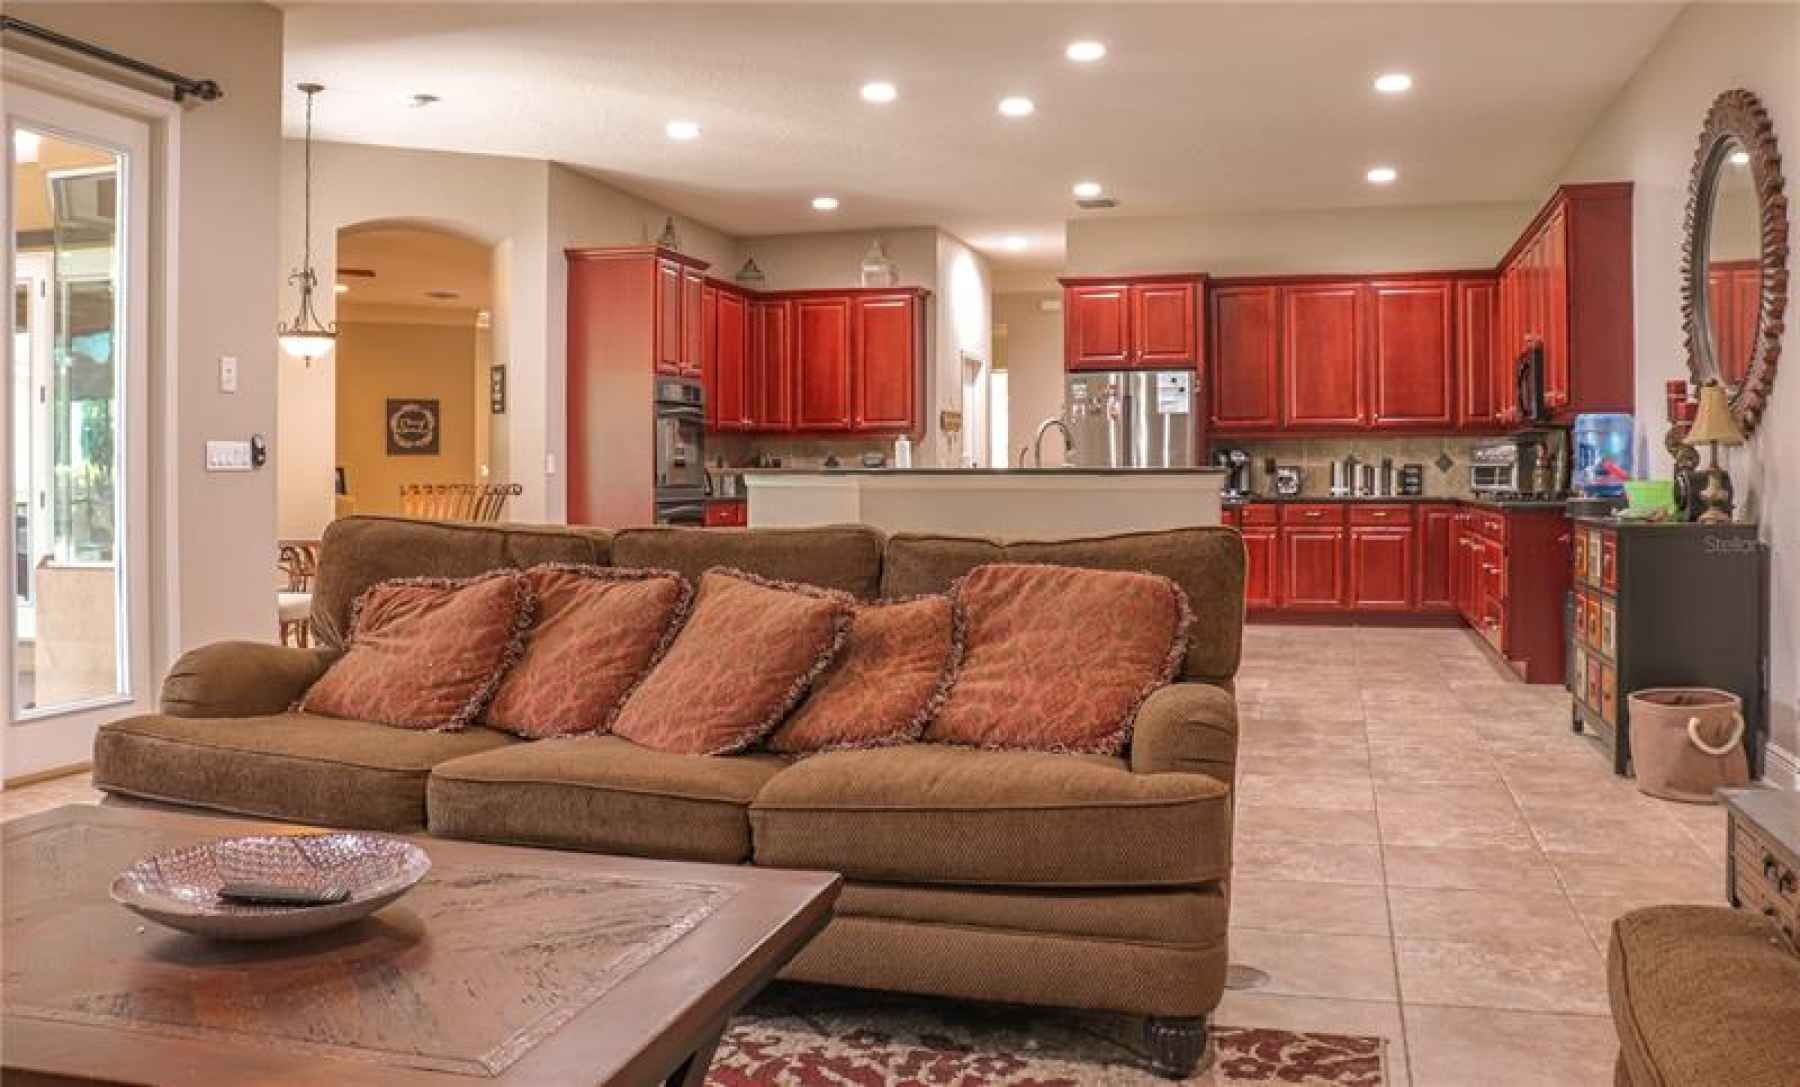 KITCHEN OVERLOOKING LARGE FAMILY ROOM